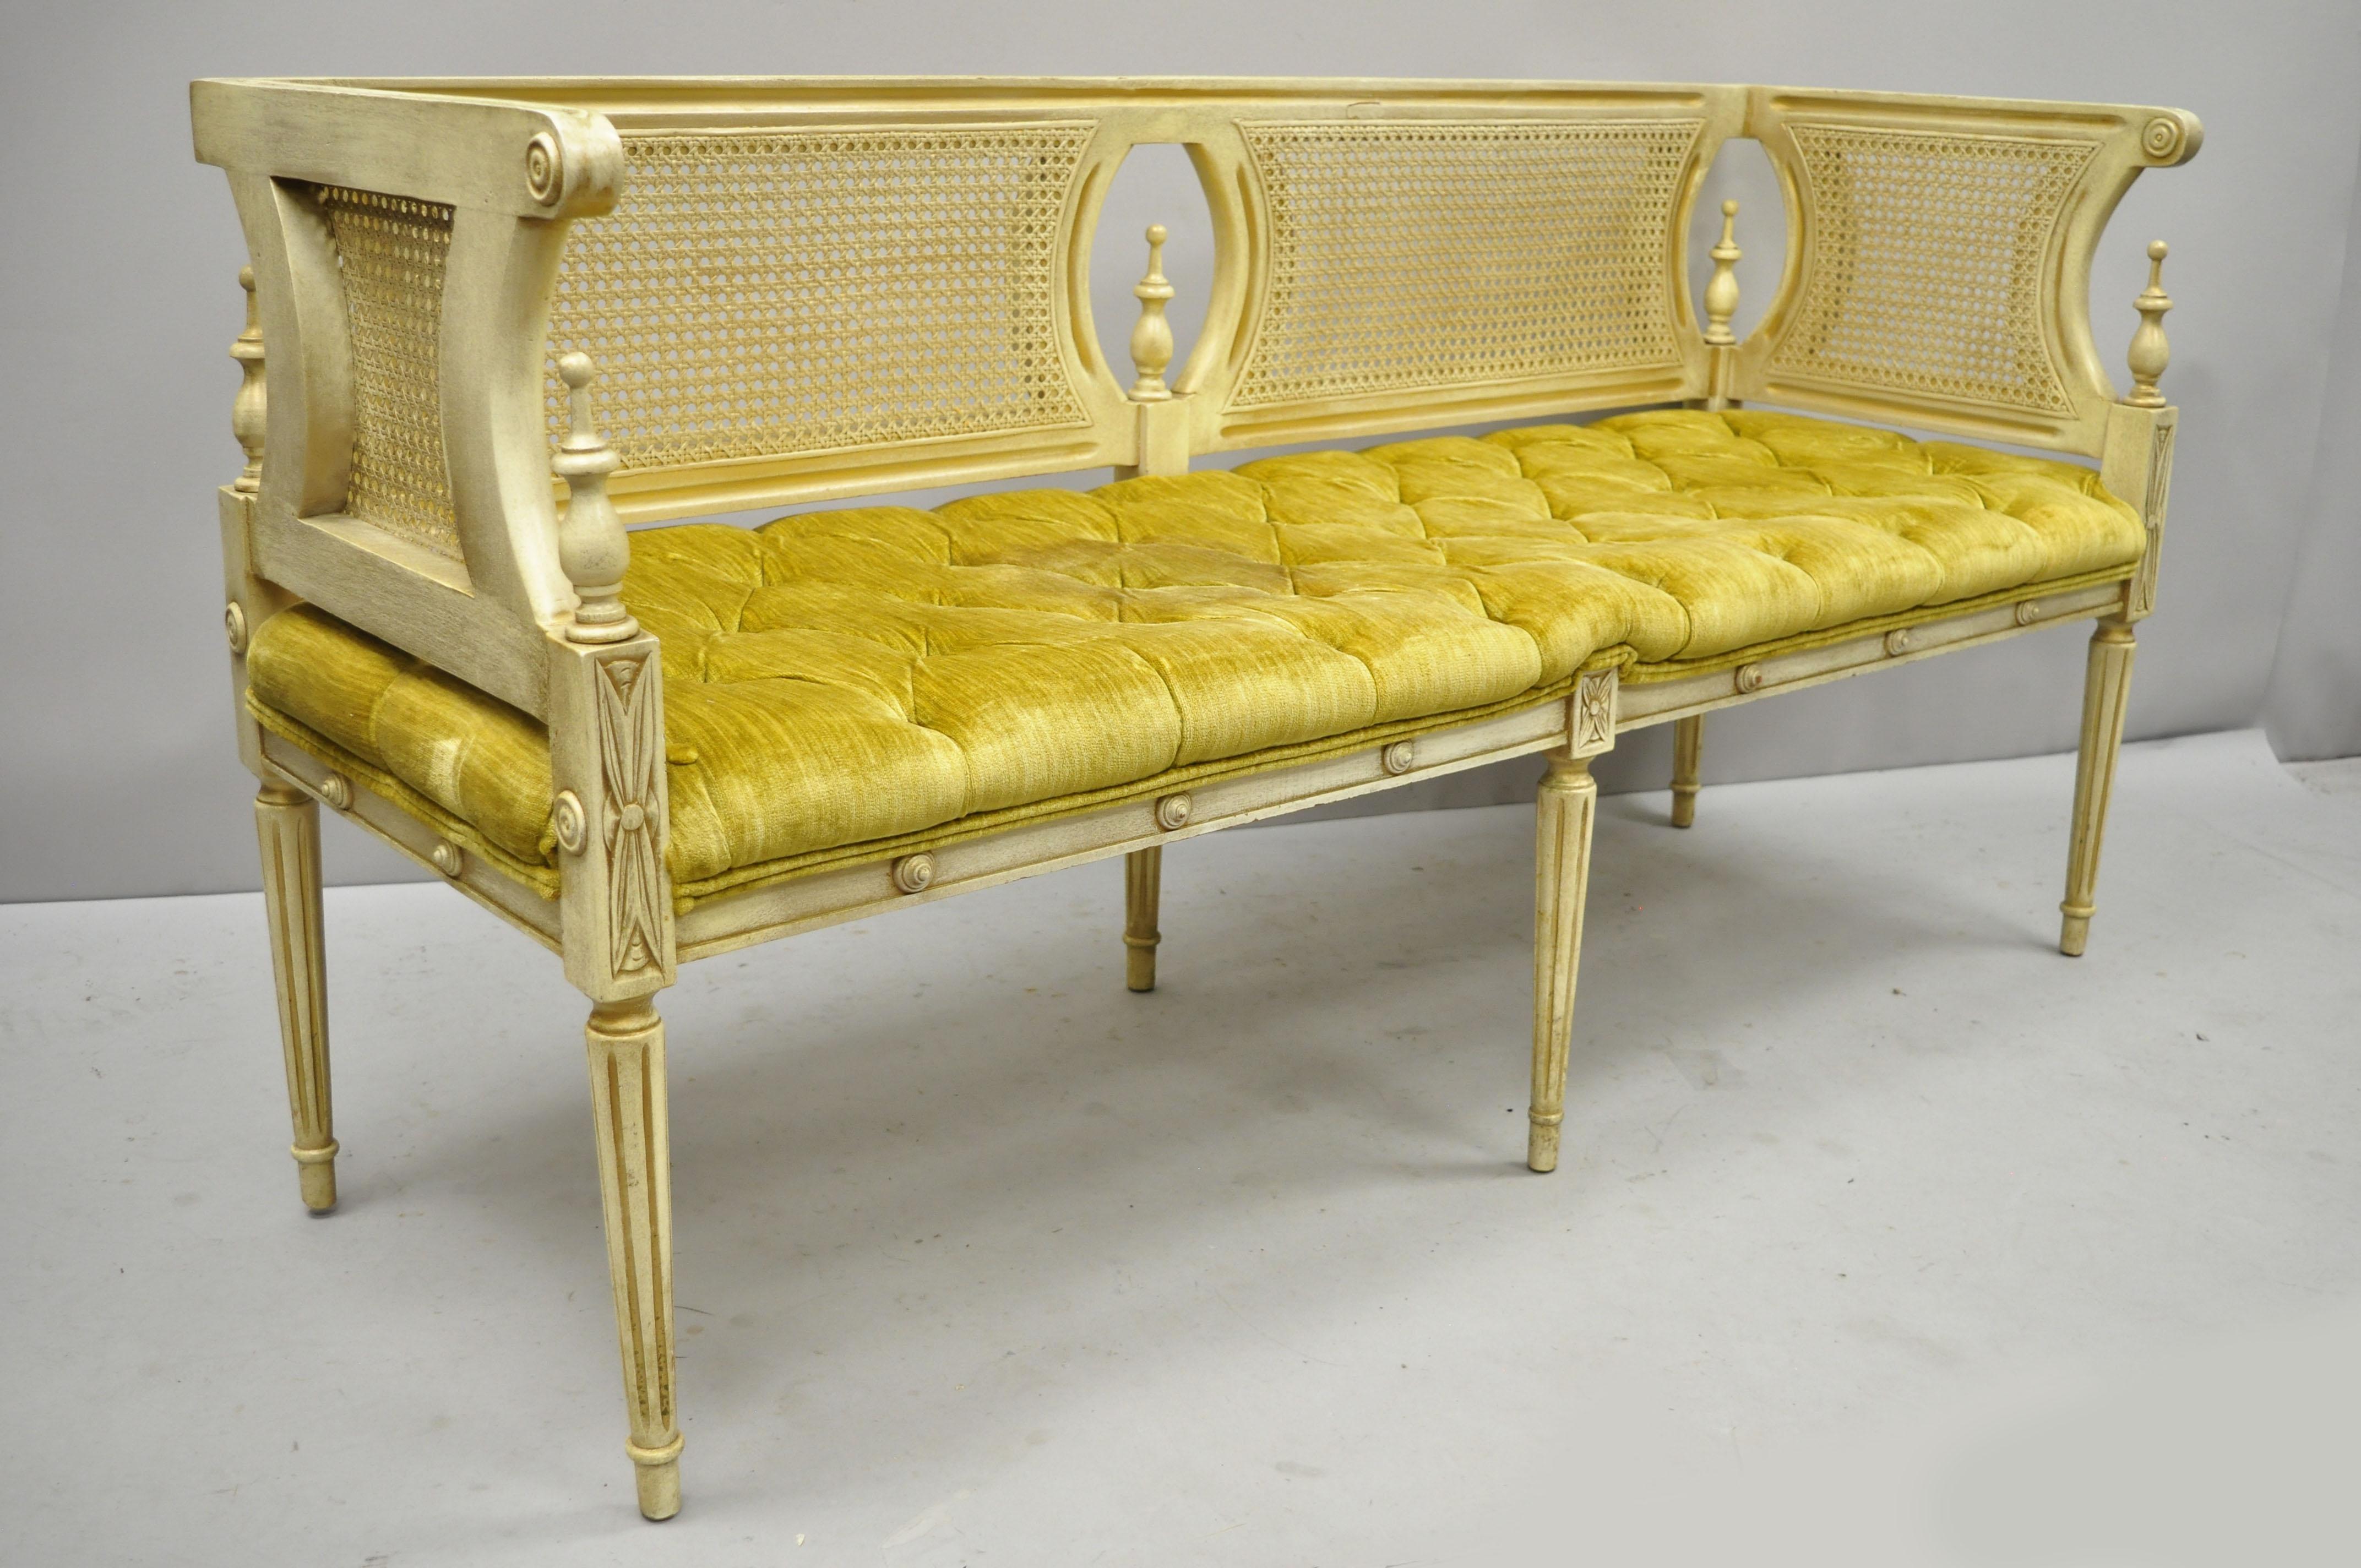 Vintage French provincial Louis XVI style cane back cream and gold bench settee. Item features cane, cream and gold painted finish, solid wood frame, nicely carved details, tapered legs, great style and form circa mid-20th century. Measurements: